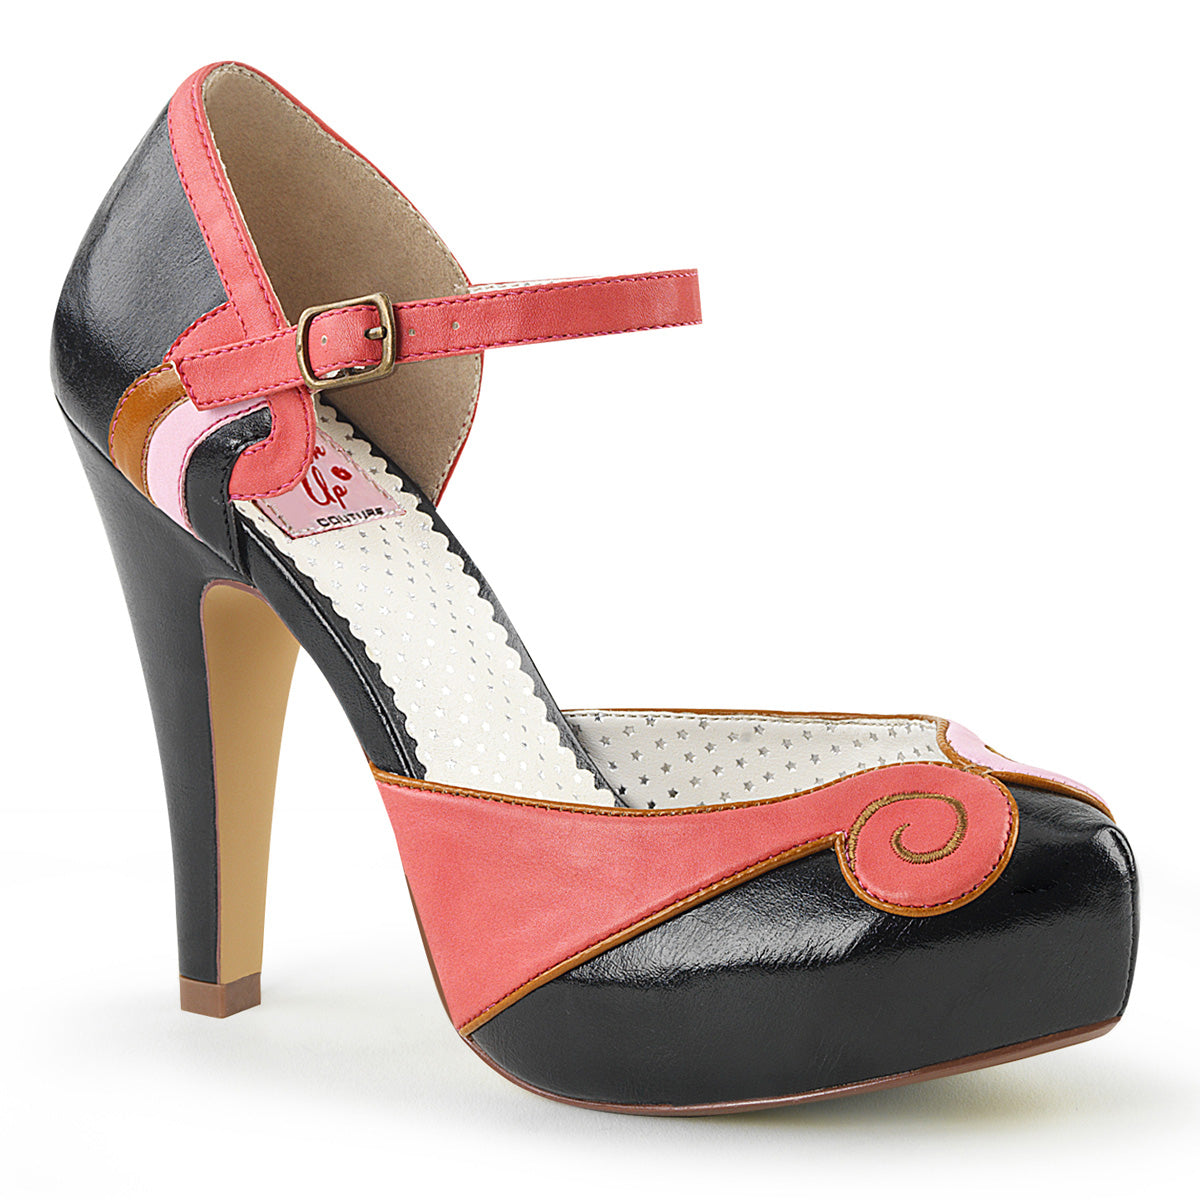 BETTIE-17 - Coral-Blk Faux Leather